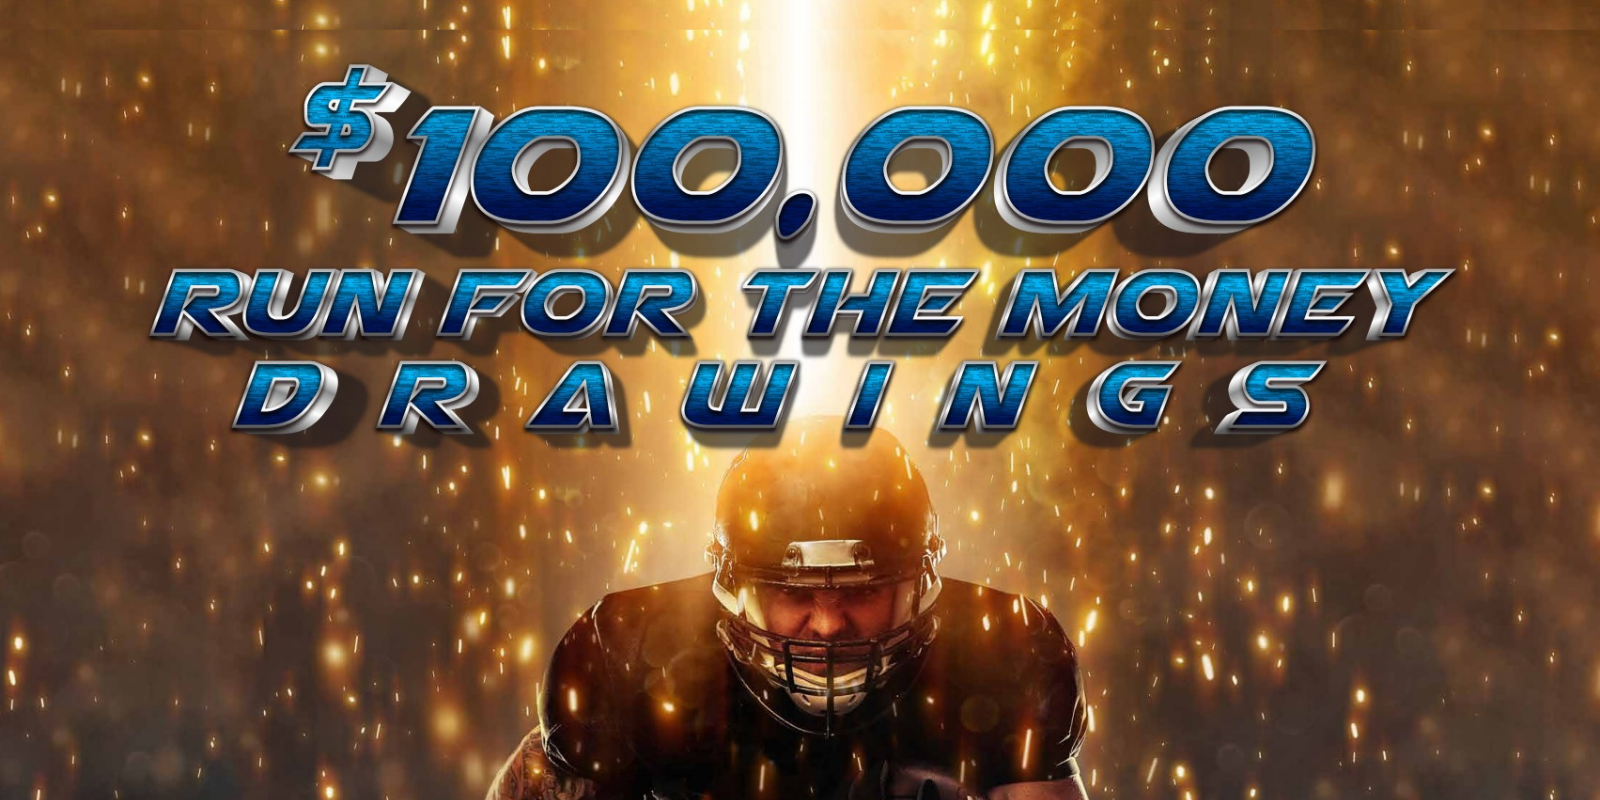 Run For The Money $100,000 Promotion